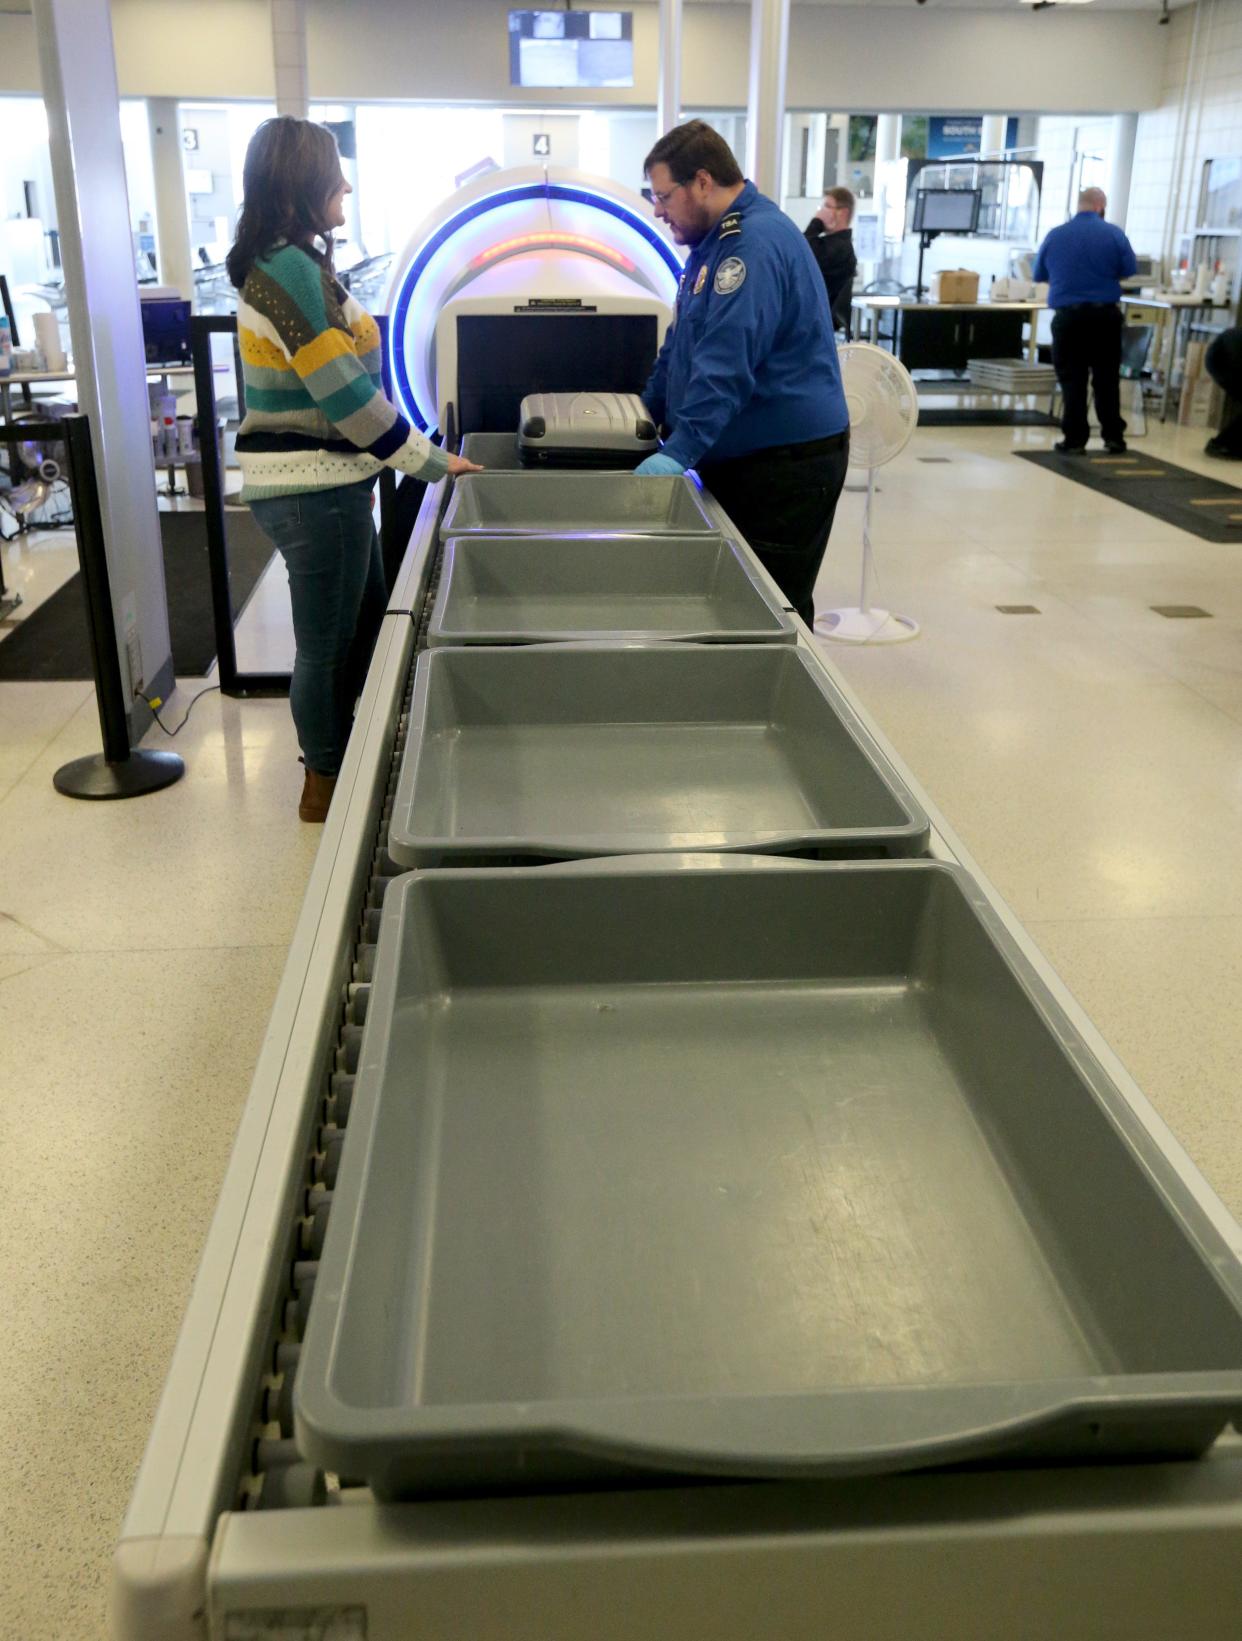 The lines for security check-in at the South Bend International Airport are staffed by TSA agents and confiscate prohibited items passengers have in their luggage and belongings. A TSA agent is at his post Friday, Jan. 27, 2023, at the airport in South Bend.